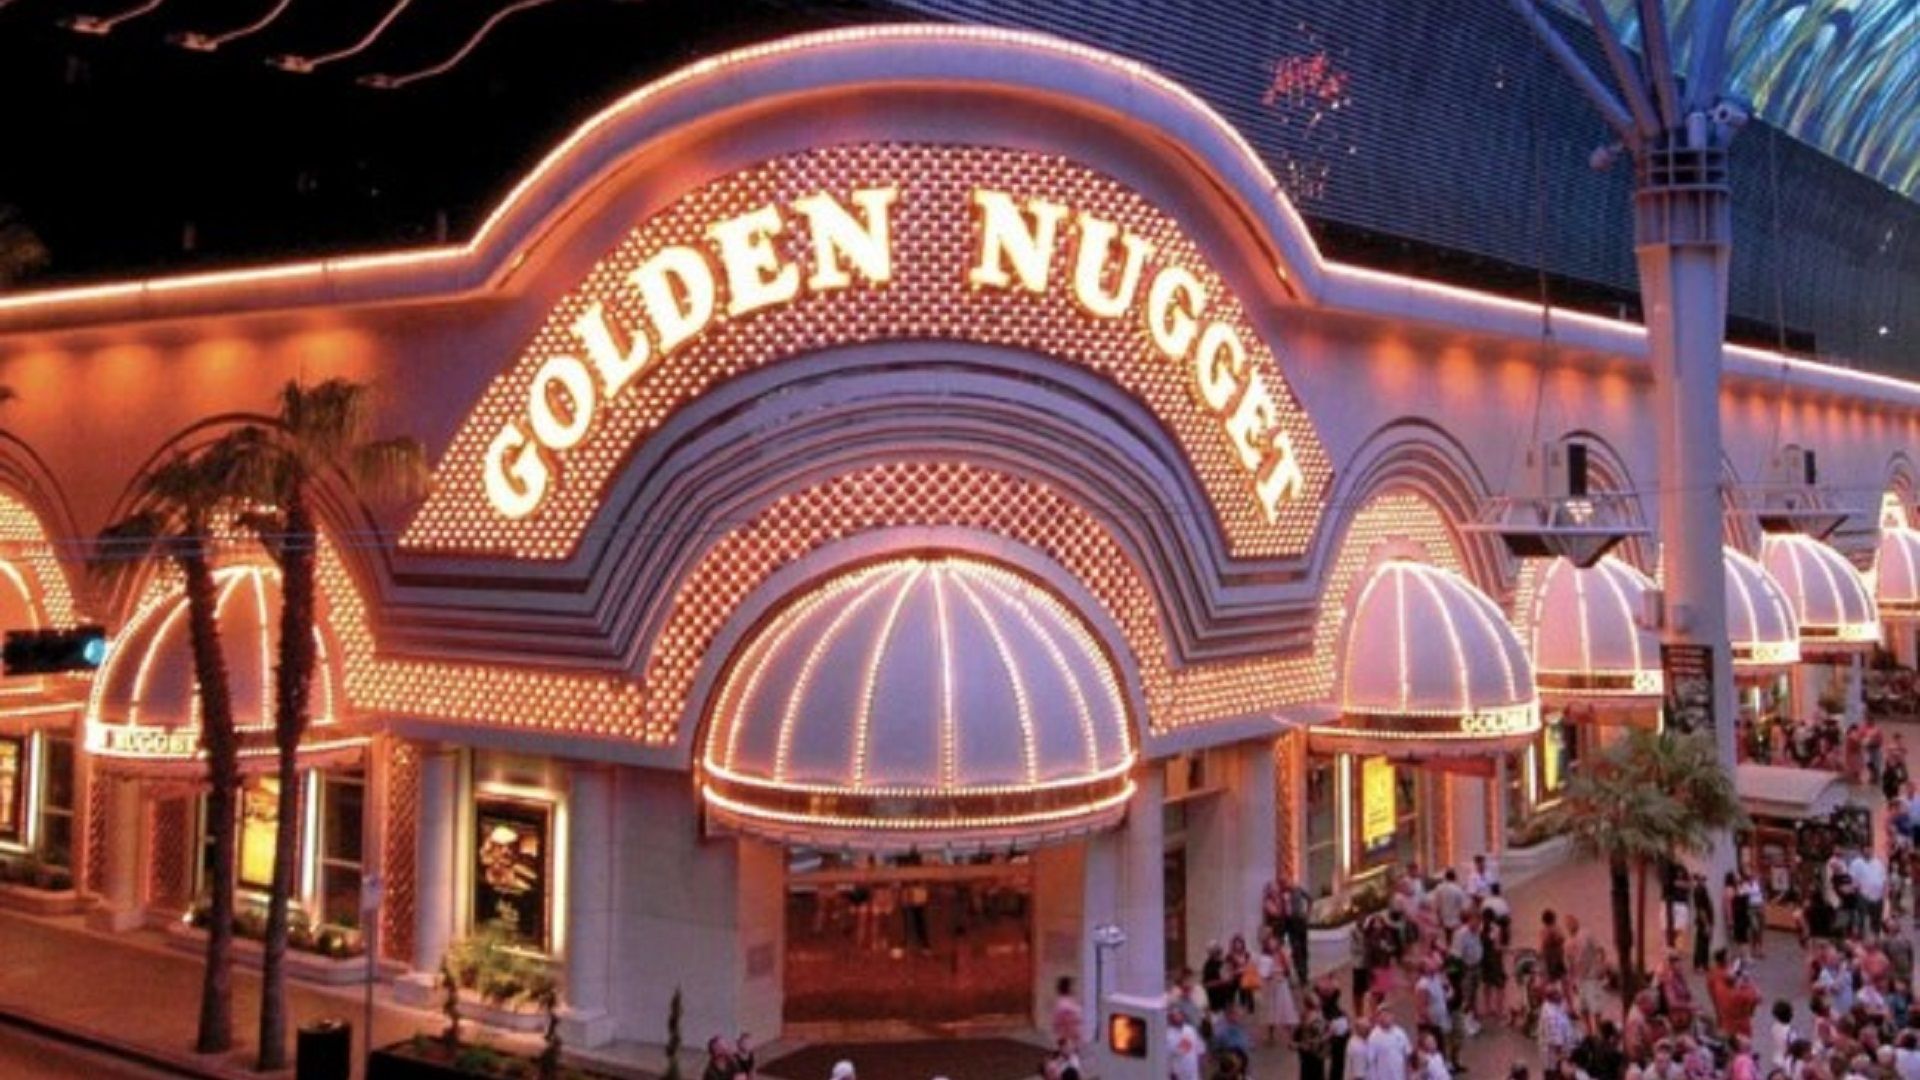 Golden Nugget Las Vegas - Have you ever played Pinball?